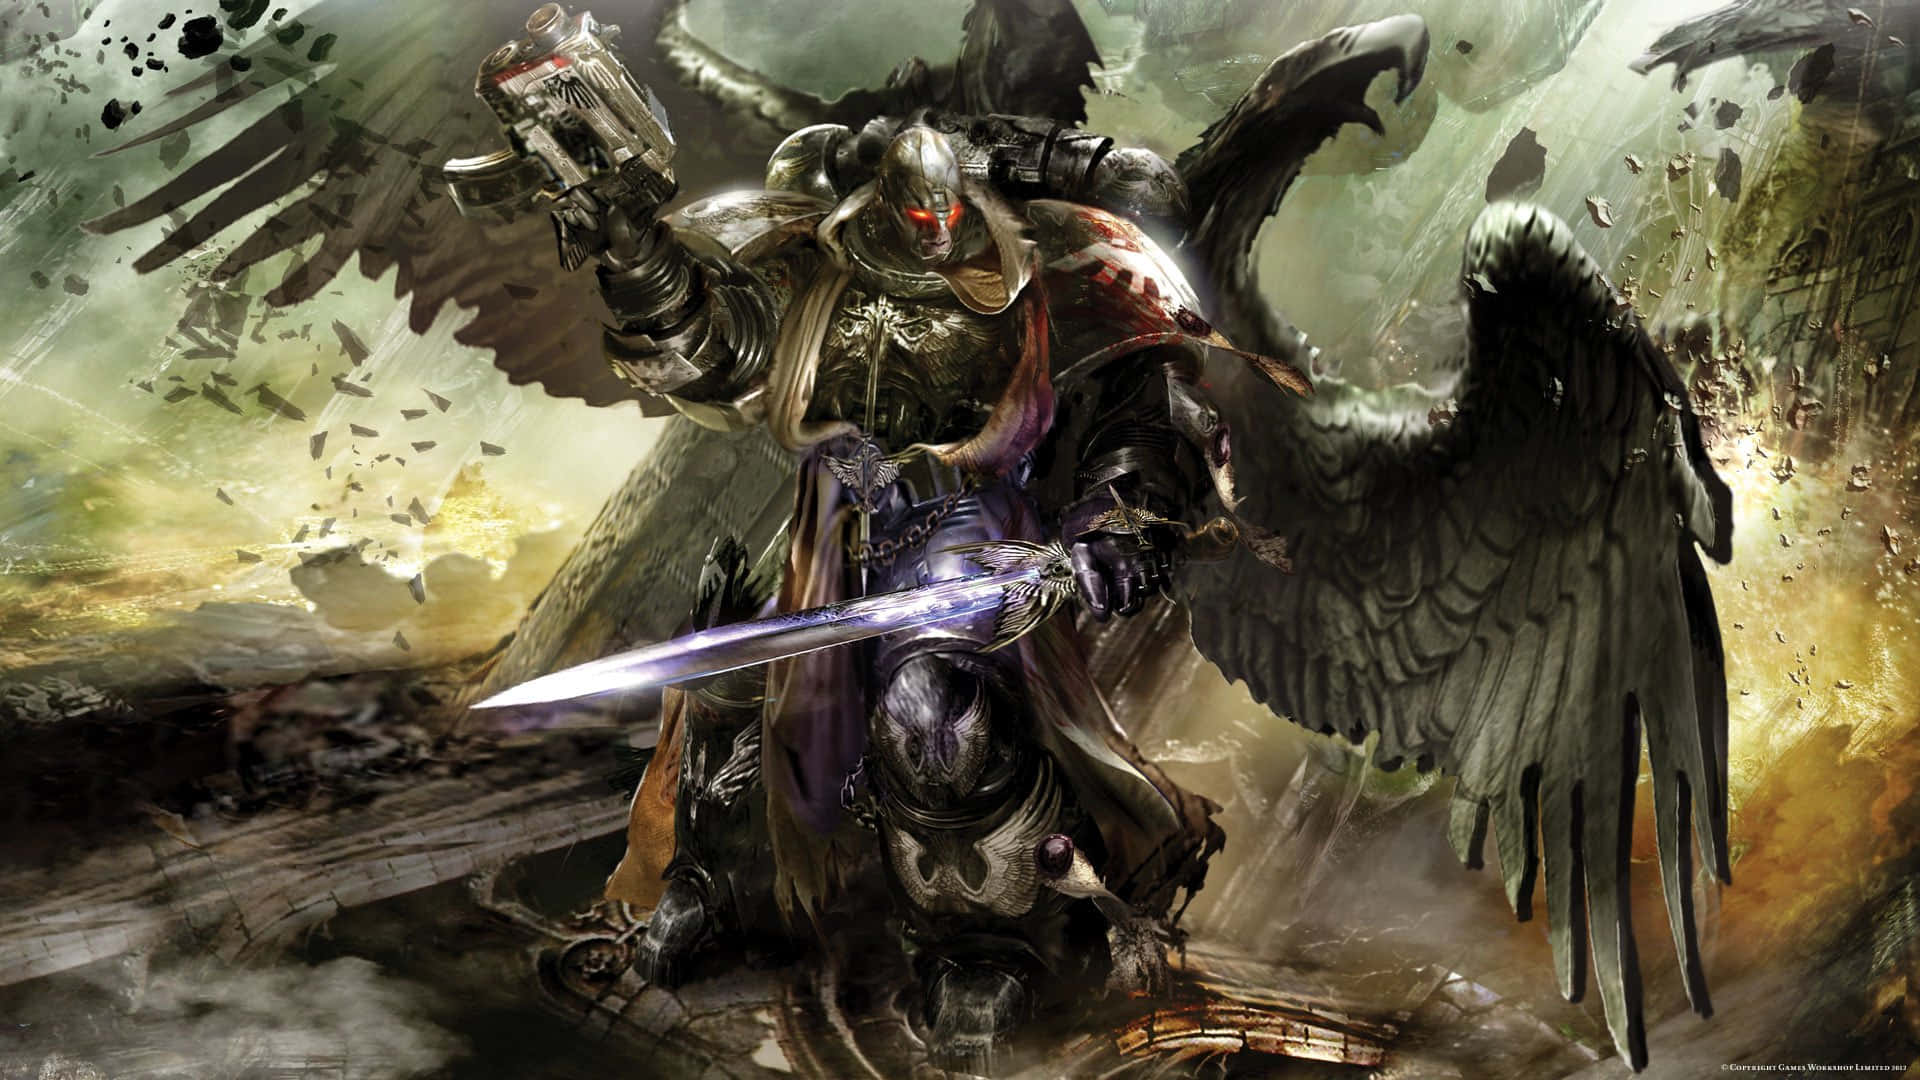 A Dark Angel With Wings And Swords Wallpaper